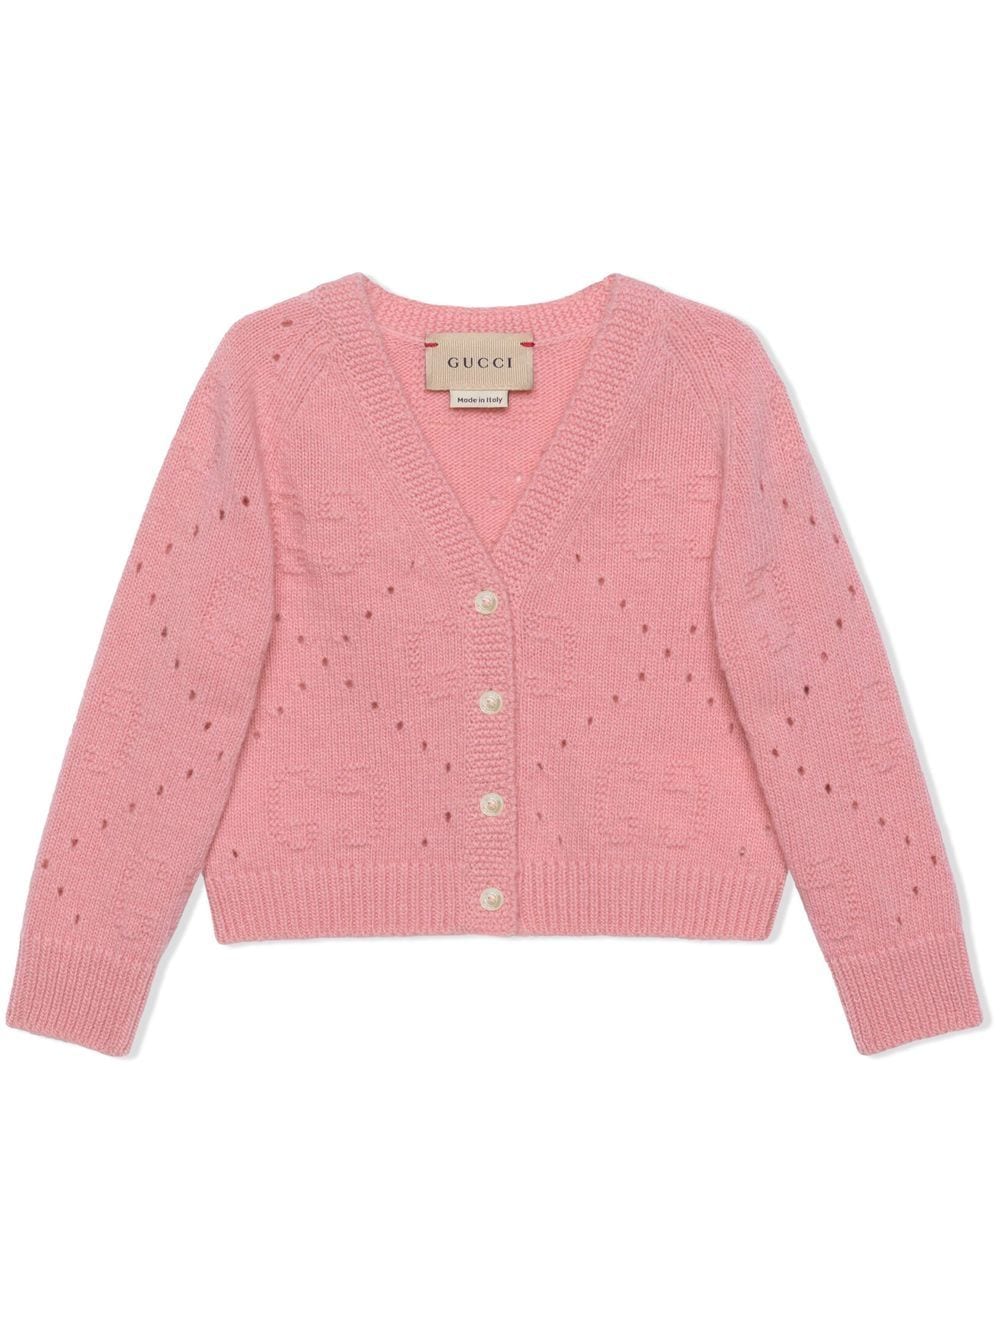 Image 1 of Gucci Kids perforated GG wool cardigan